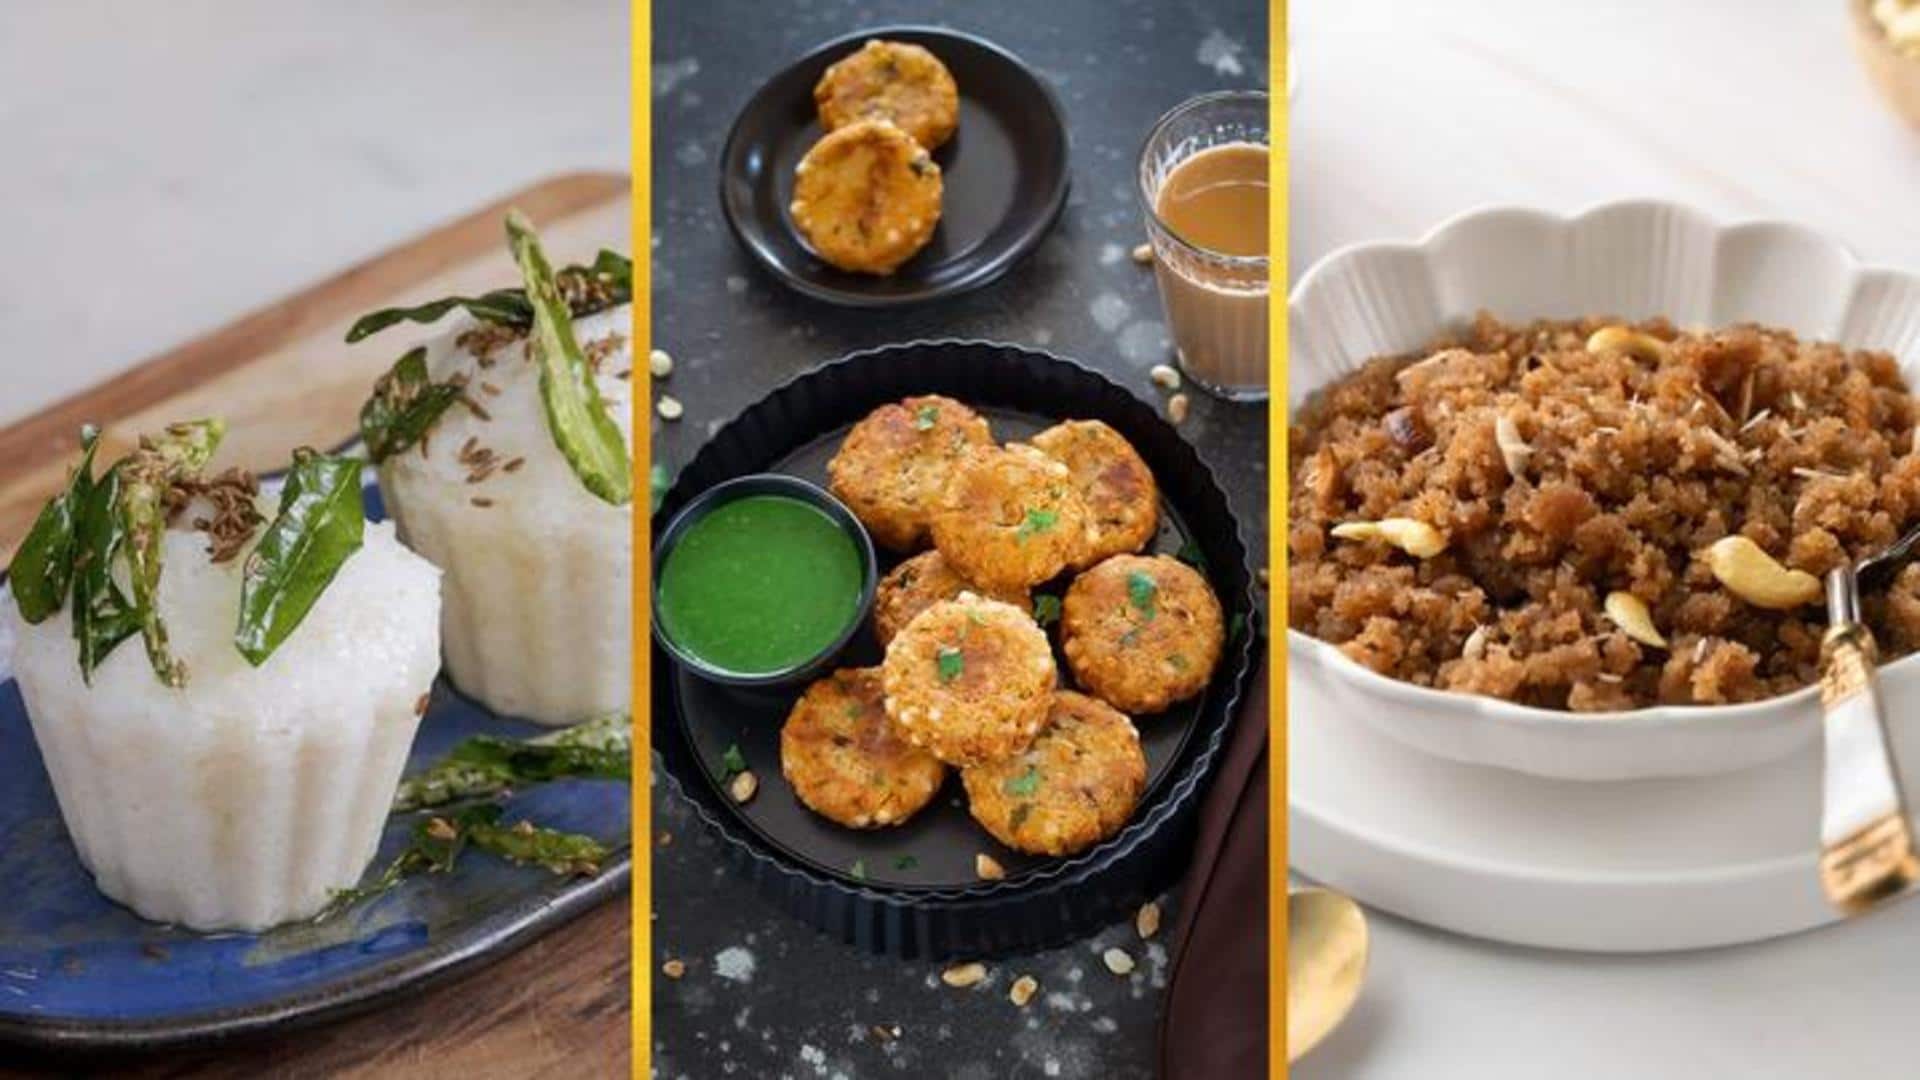 Maha Shivratri: 5 recipes you can try while fasting